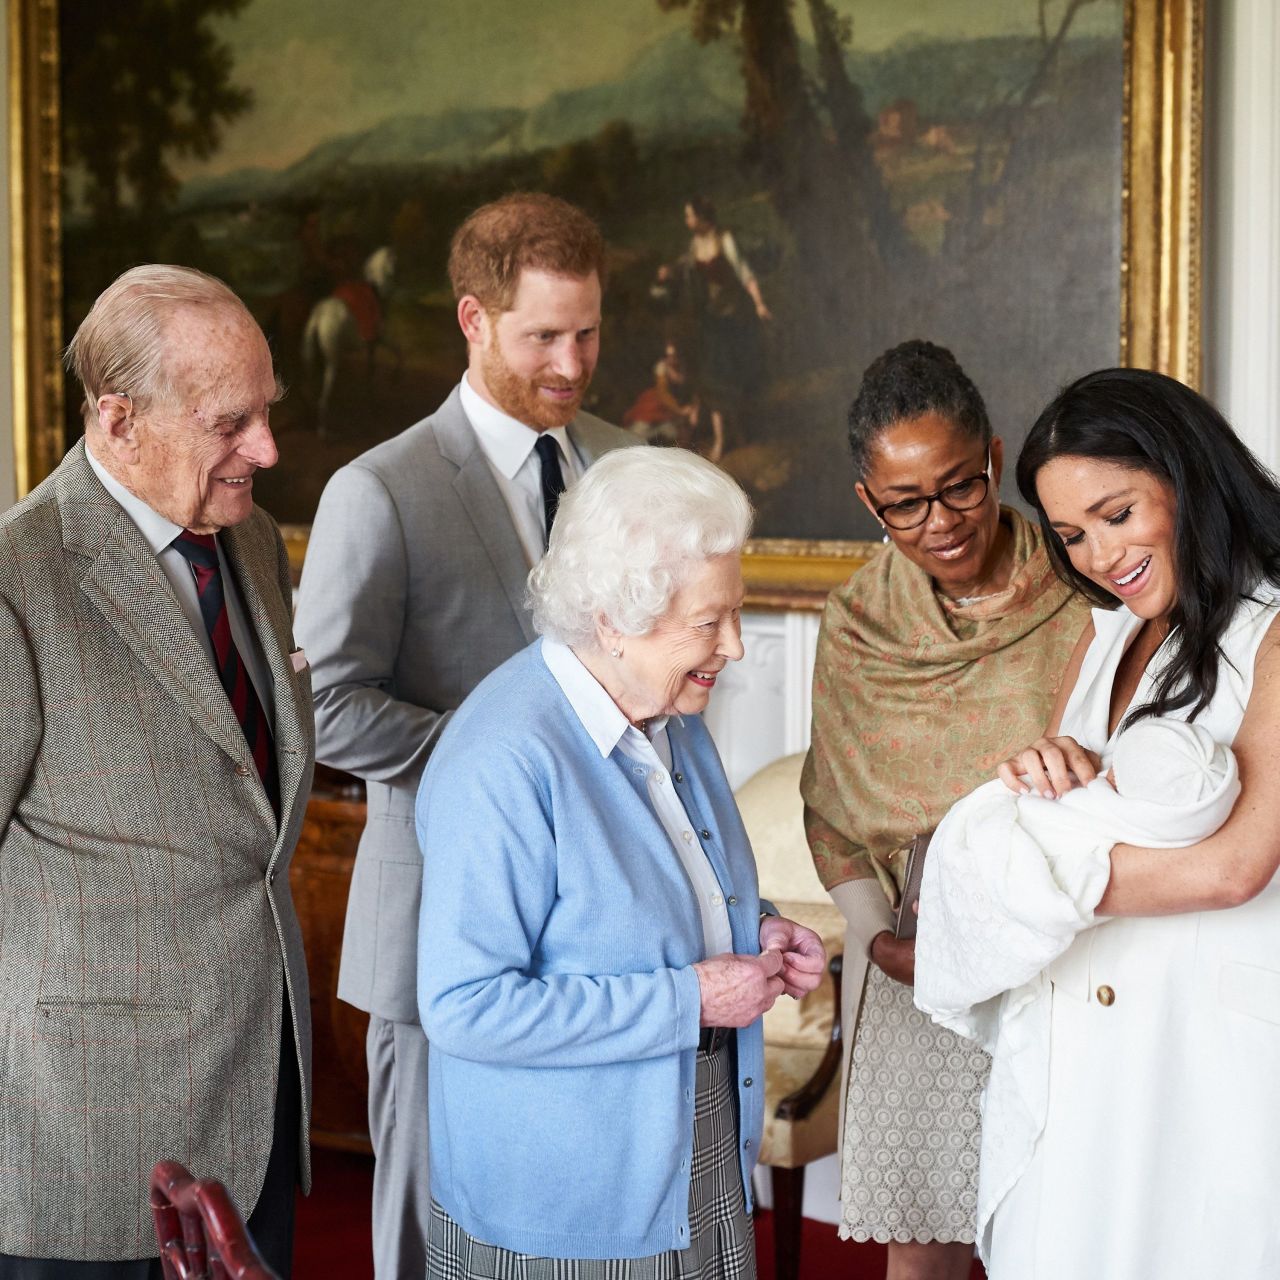 The Queen looks at <a href="http://www.cnn.com/2019/05/08/uk/gallery/archie-royal-baby-harry-meghan/index.html" target="_blank">her new great-grandchild, Archie,</a> in May 2019. Archie is the first child of Prince Harry, second from left, and his wife Meghan, the Duchess of Sussex. Prince Philip is on the far left. Meghan's mother, Doria Ragland, is next to her at right.